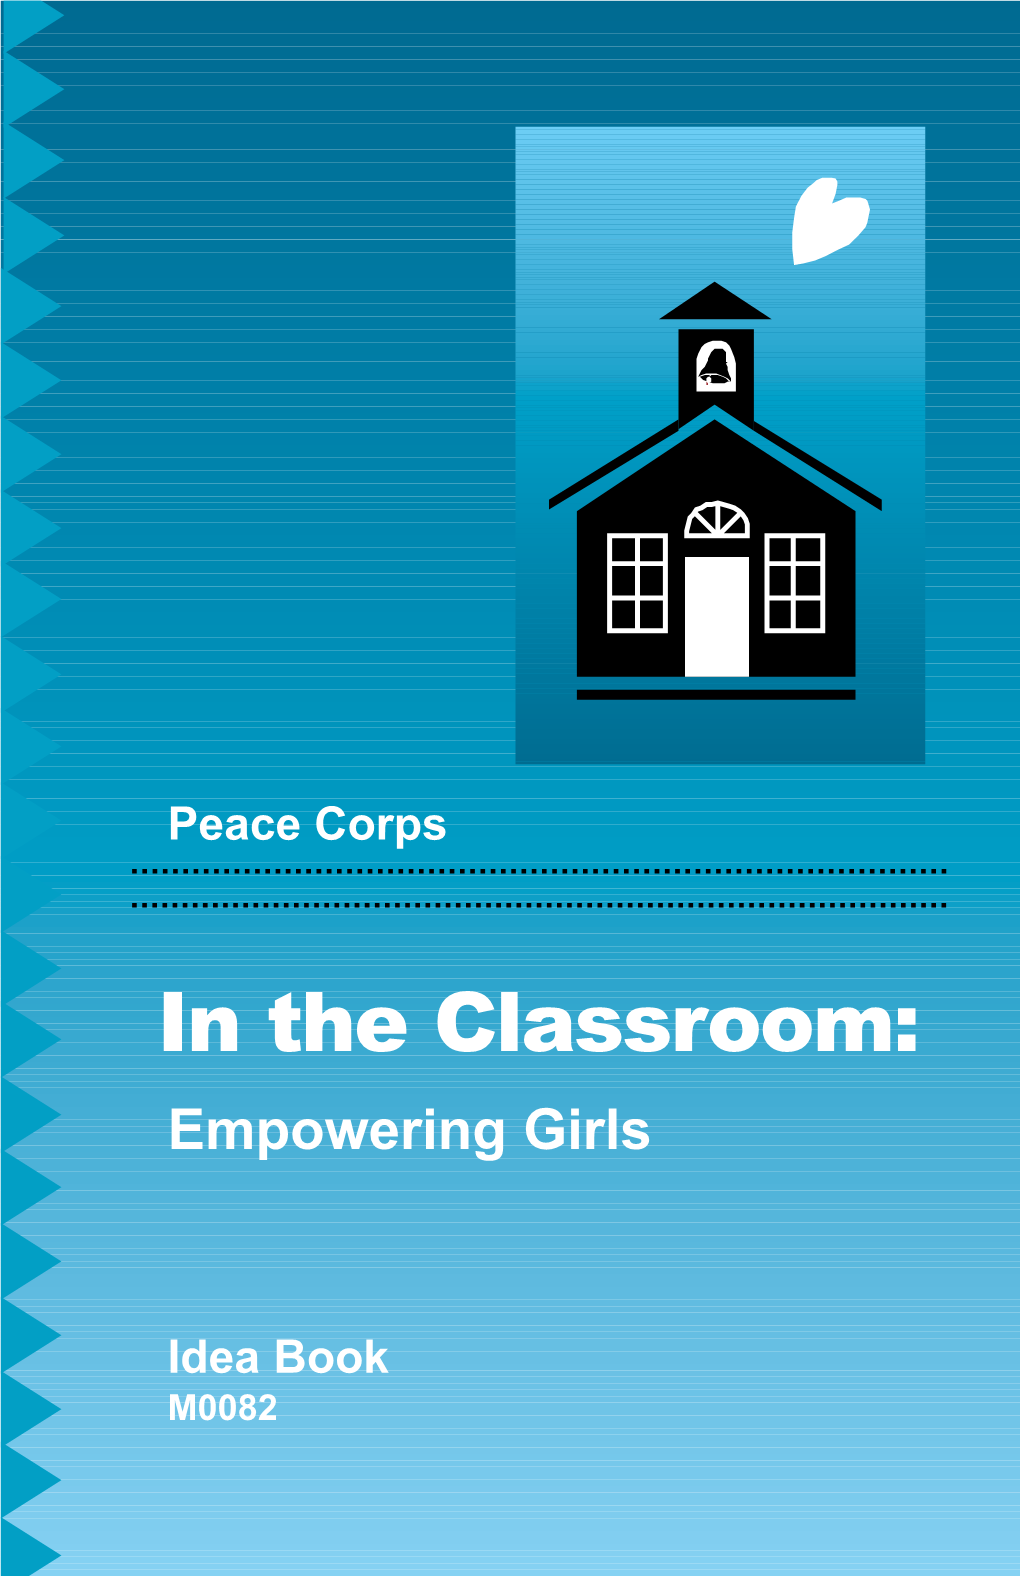 In the Classroom: Empowering Girls